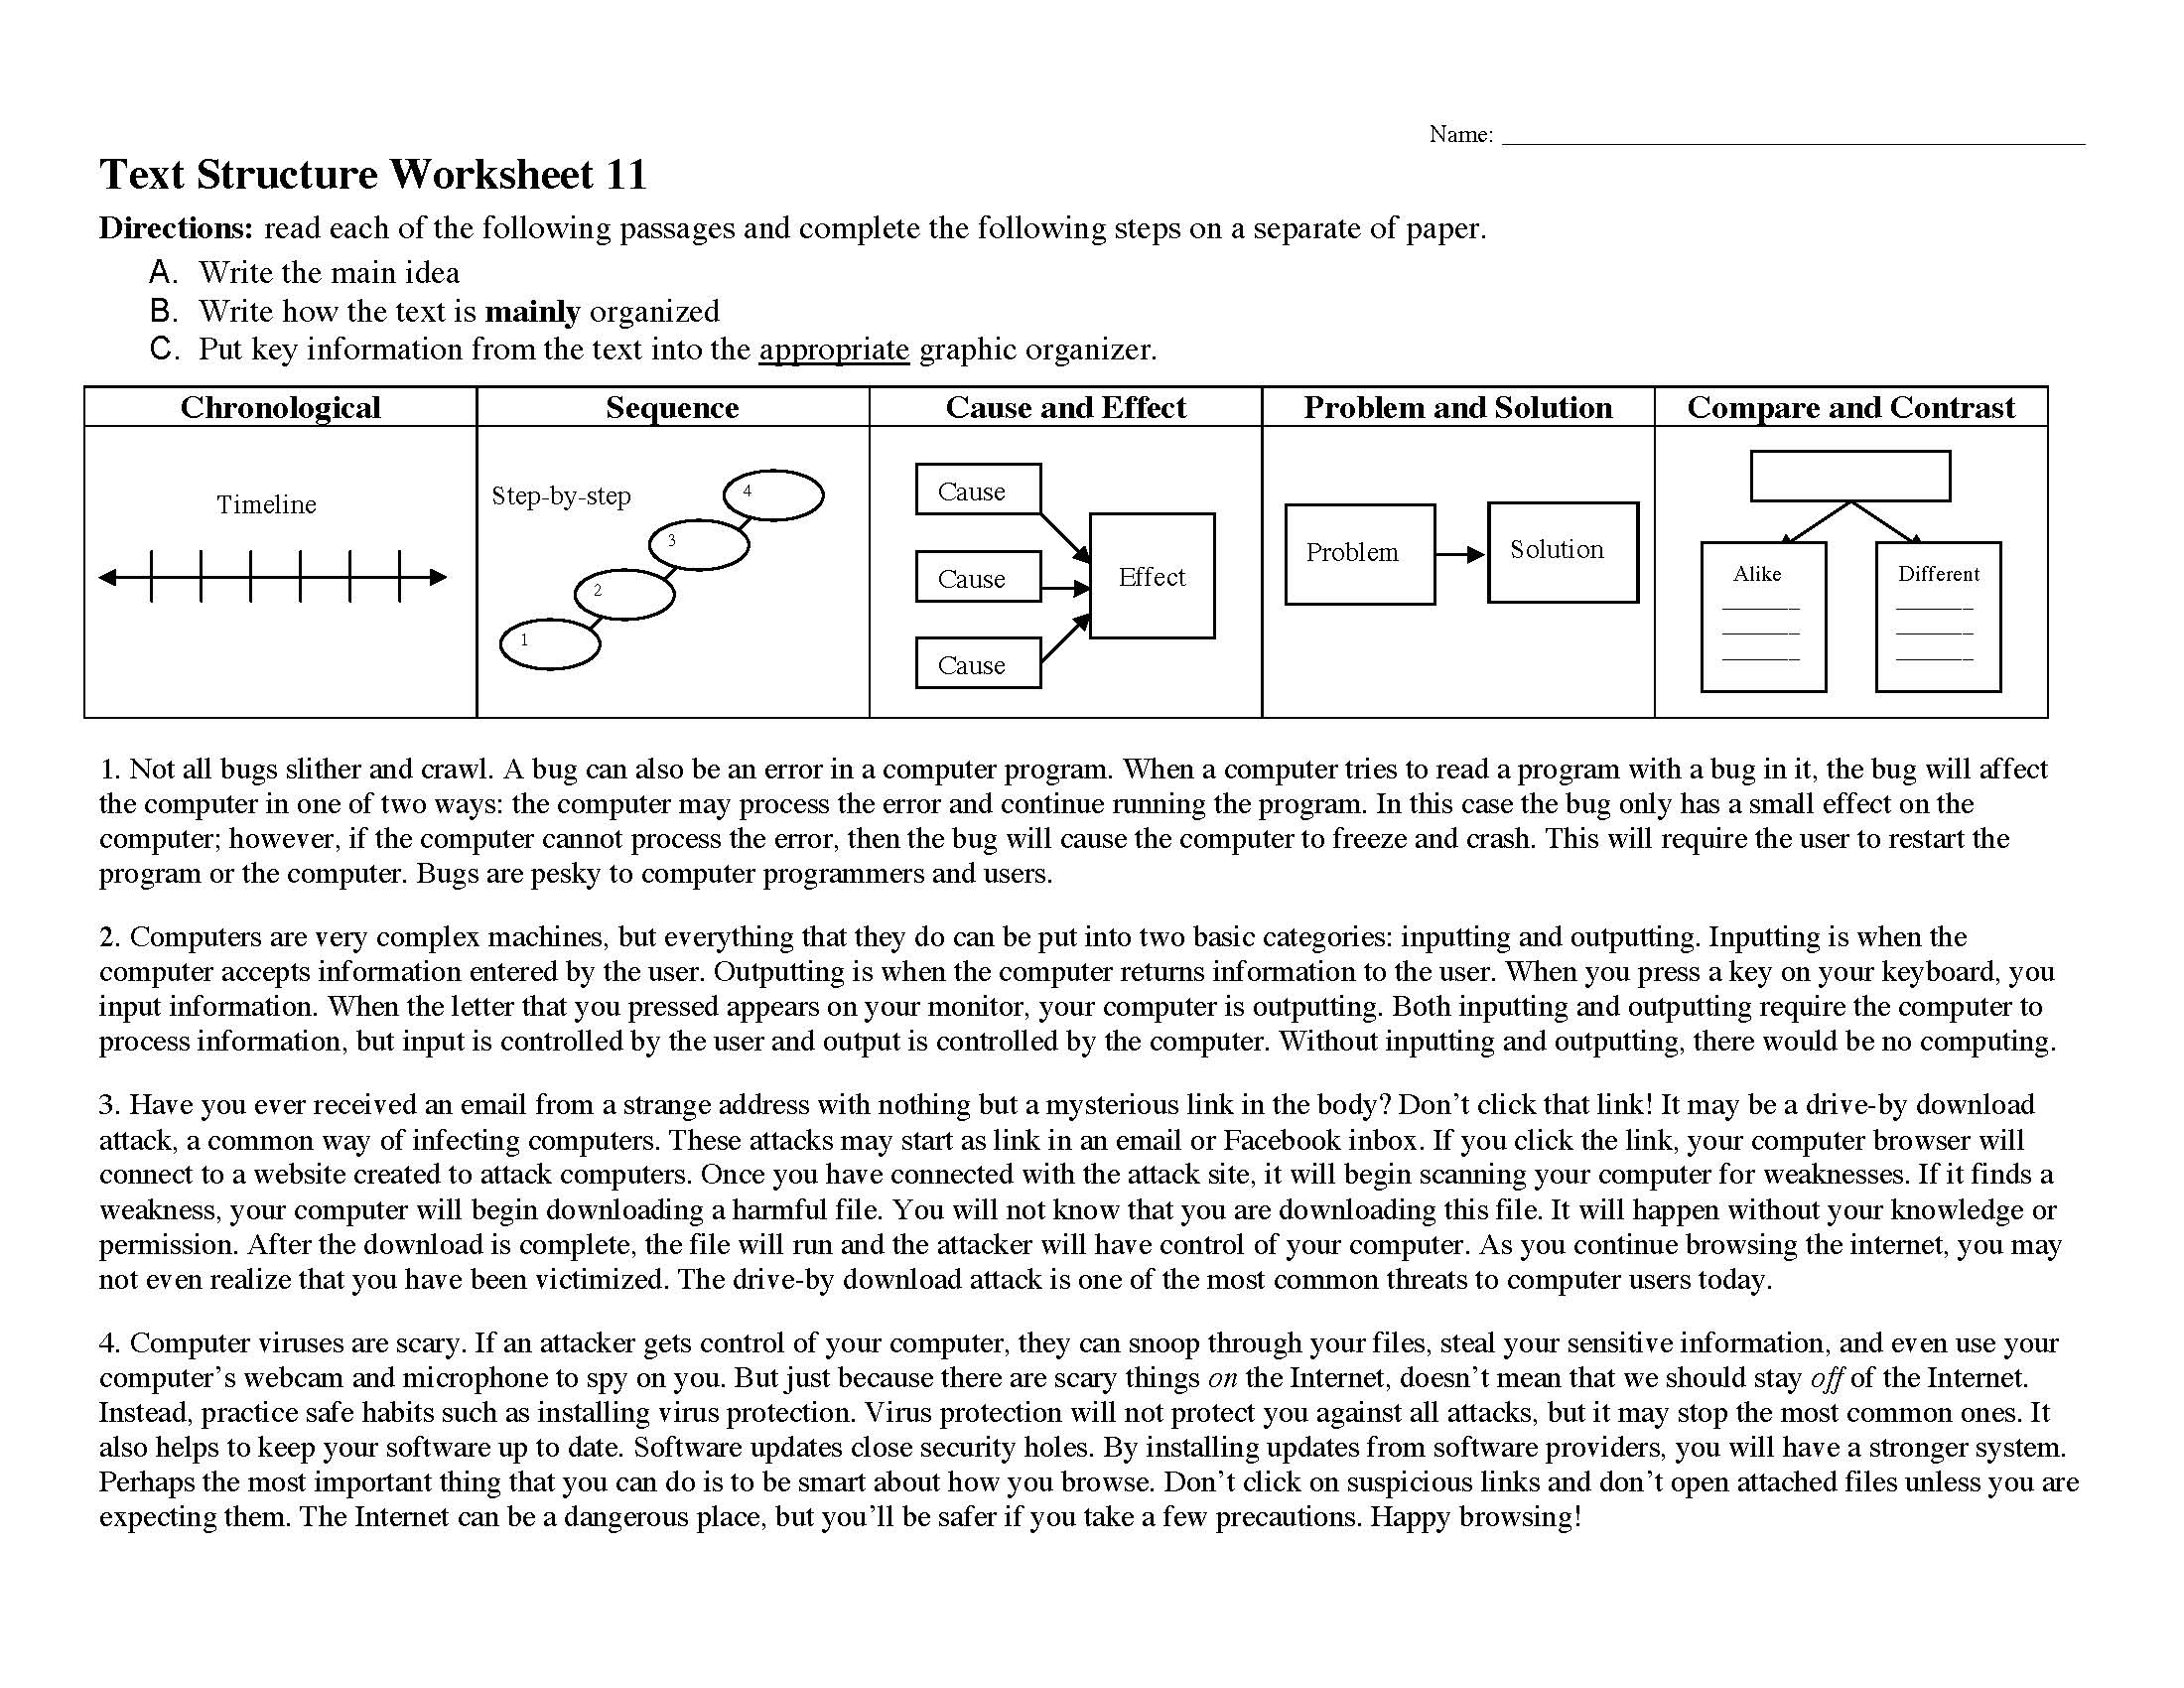 This is a preview image of Text Structure Worksheet 11. Click on it to enlarge it or view the source file.